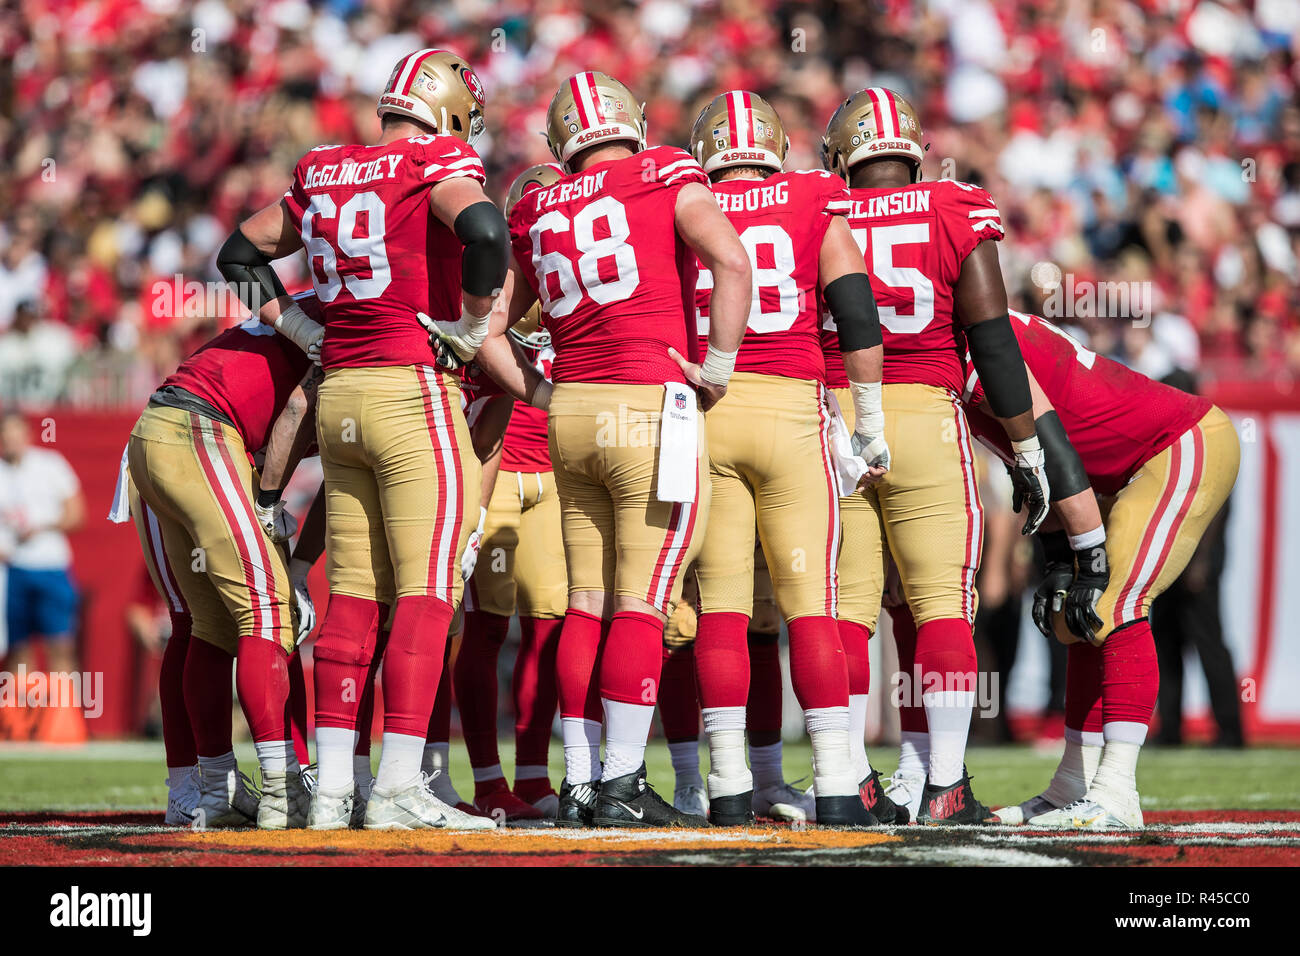 Huddle Up with Huggies and San Francisco 49ers!